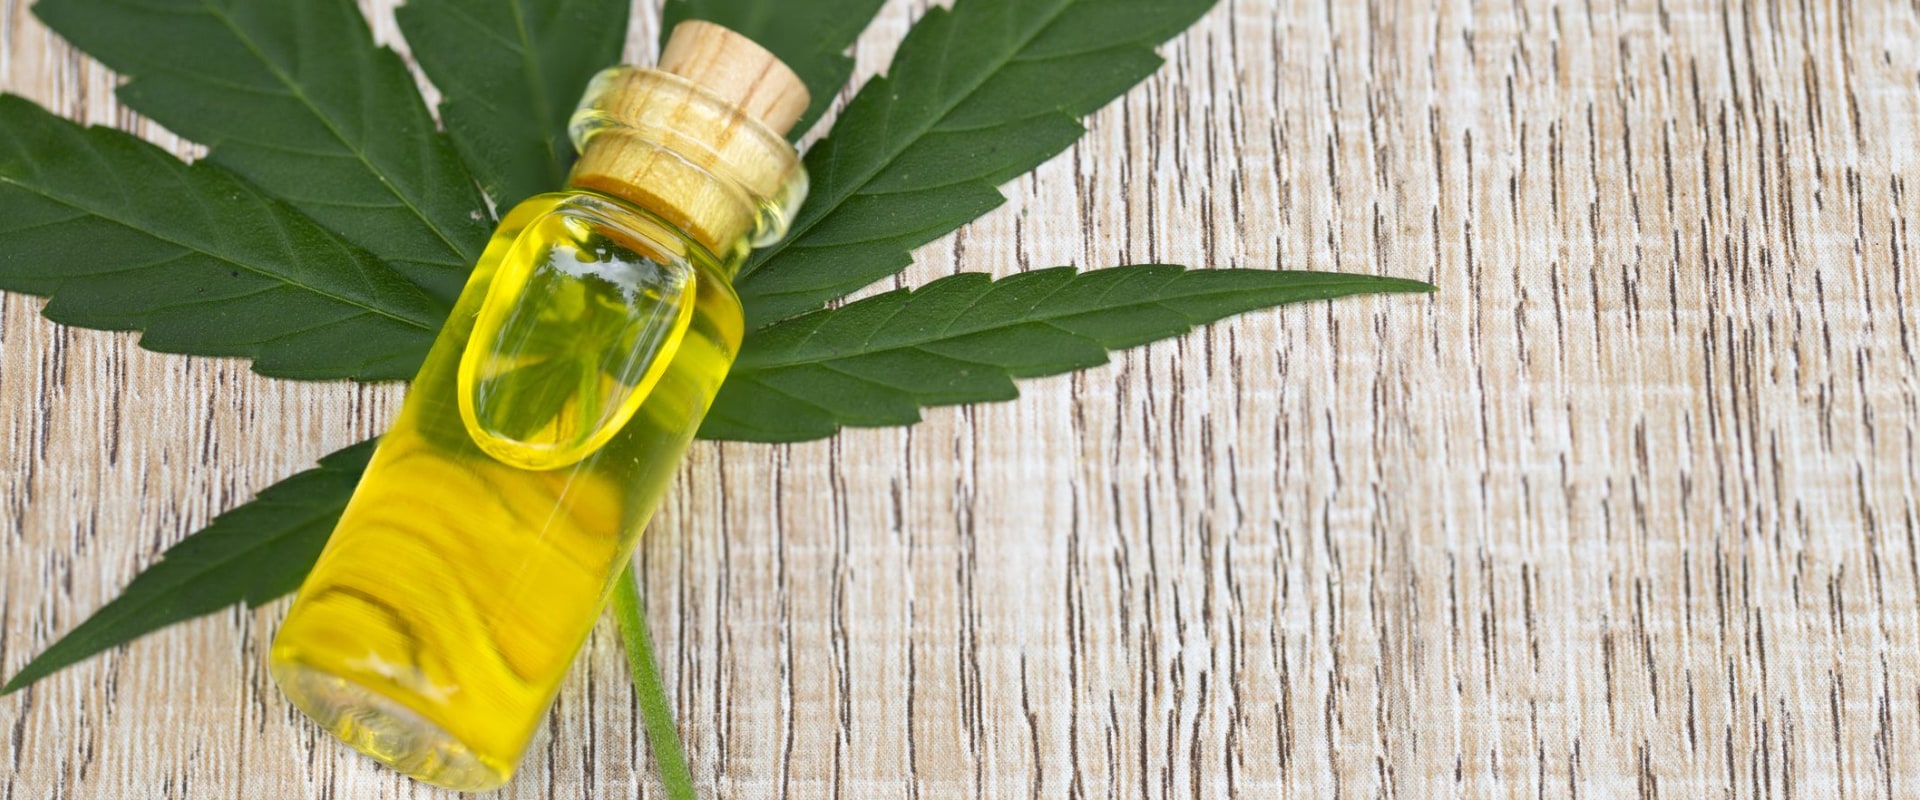 Does cbd oil work for pain and anxiety?